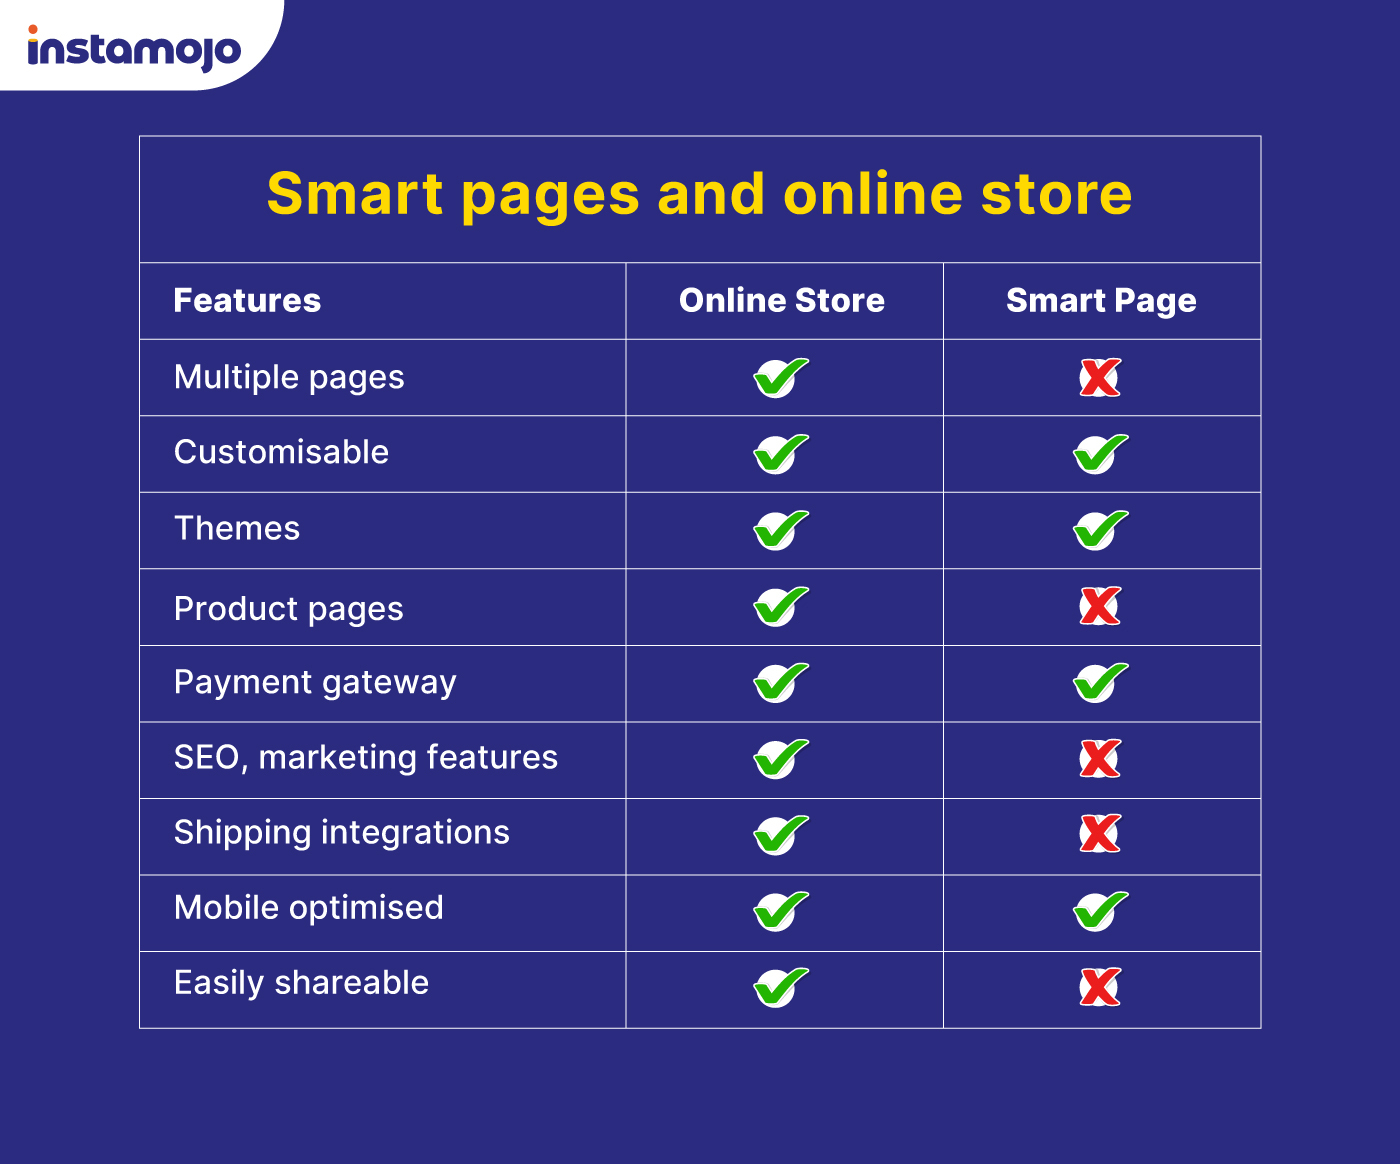 smart pages - service based business